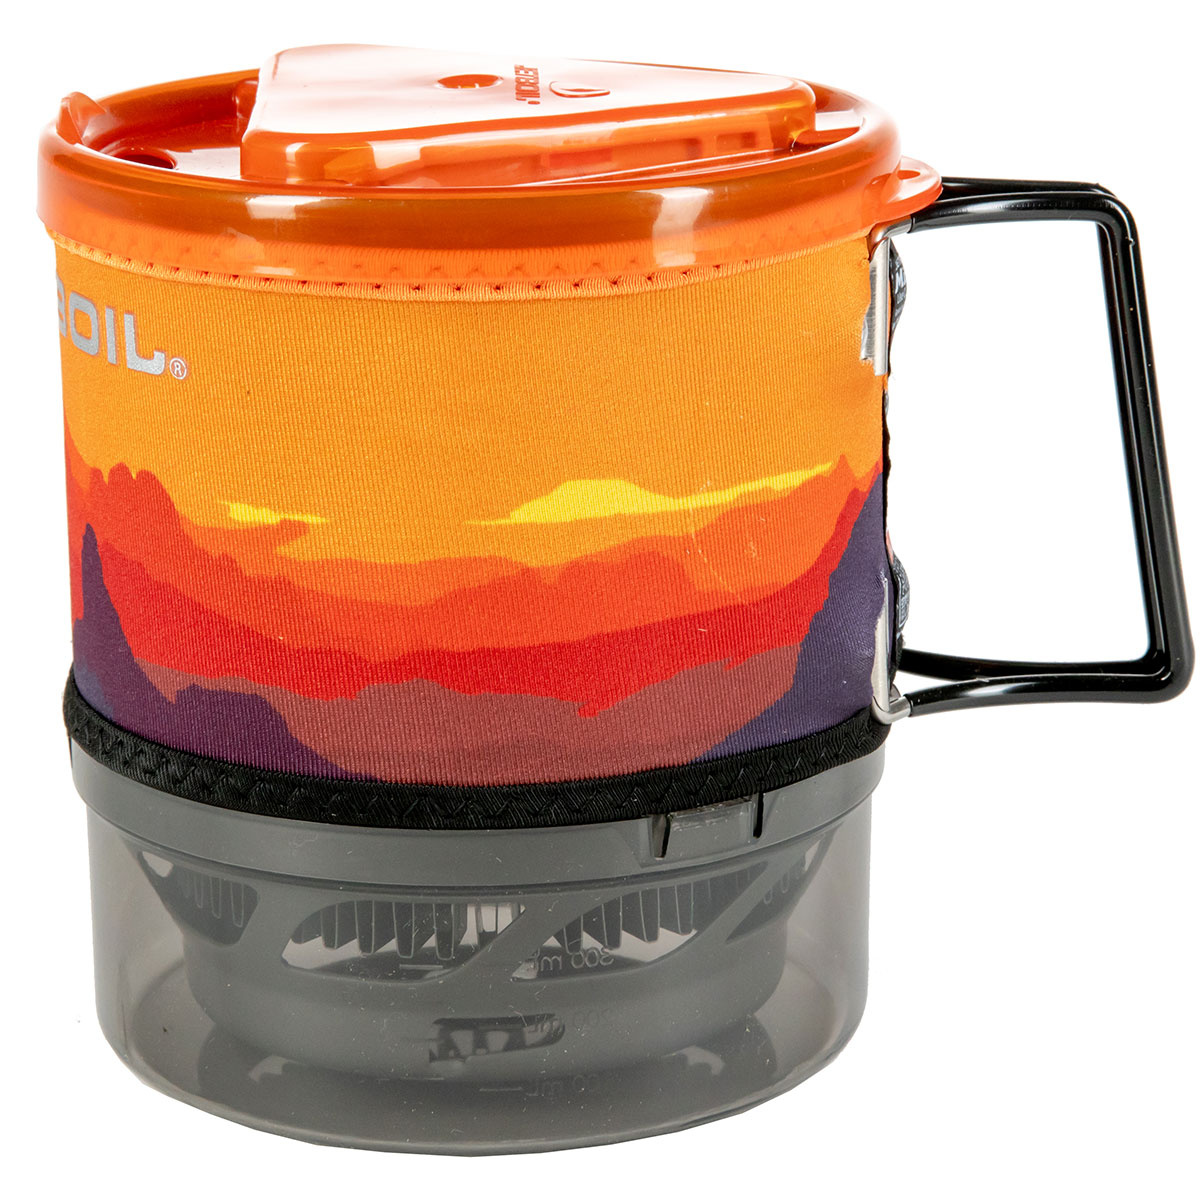 Image of Jetboil Fornello MiniMo